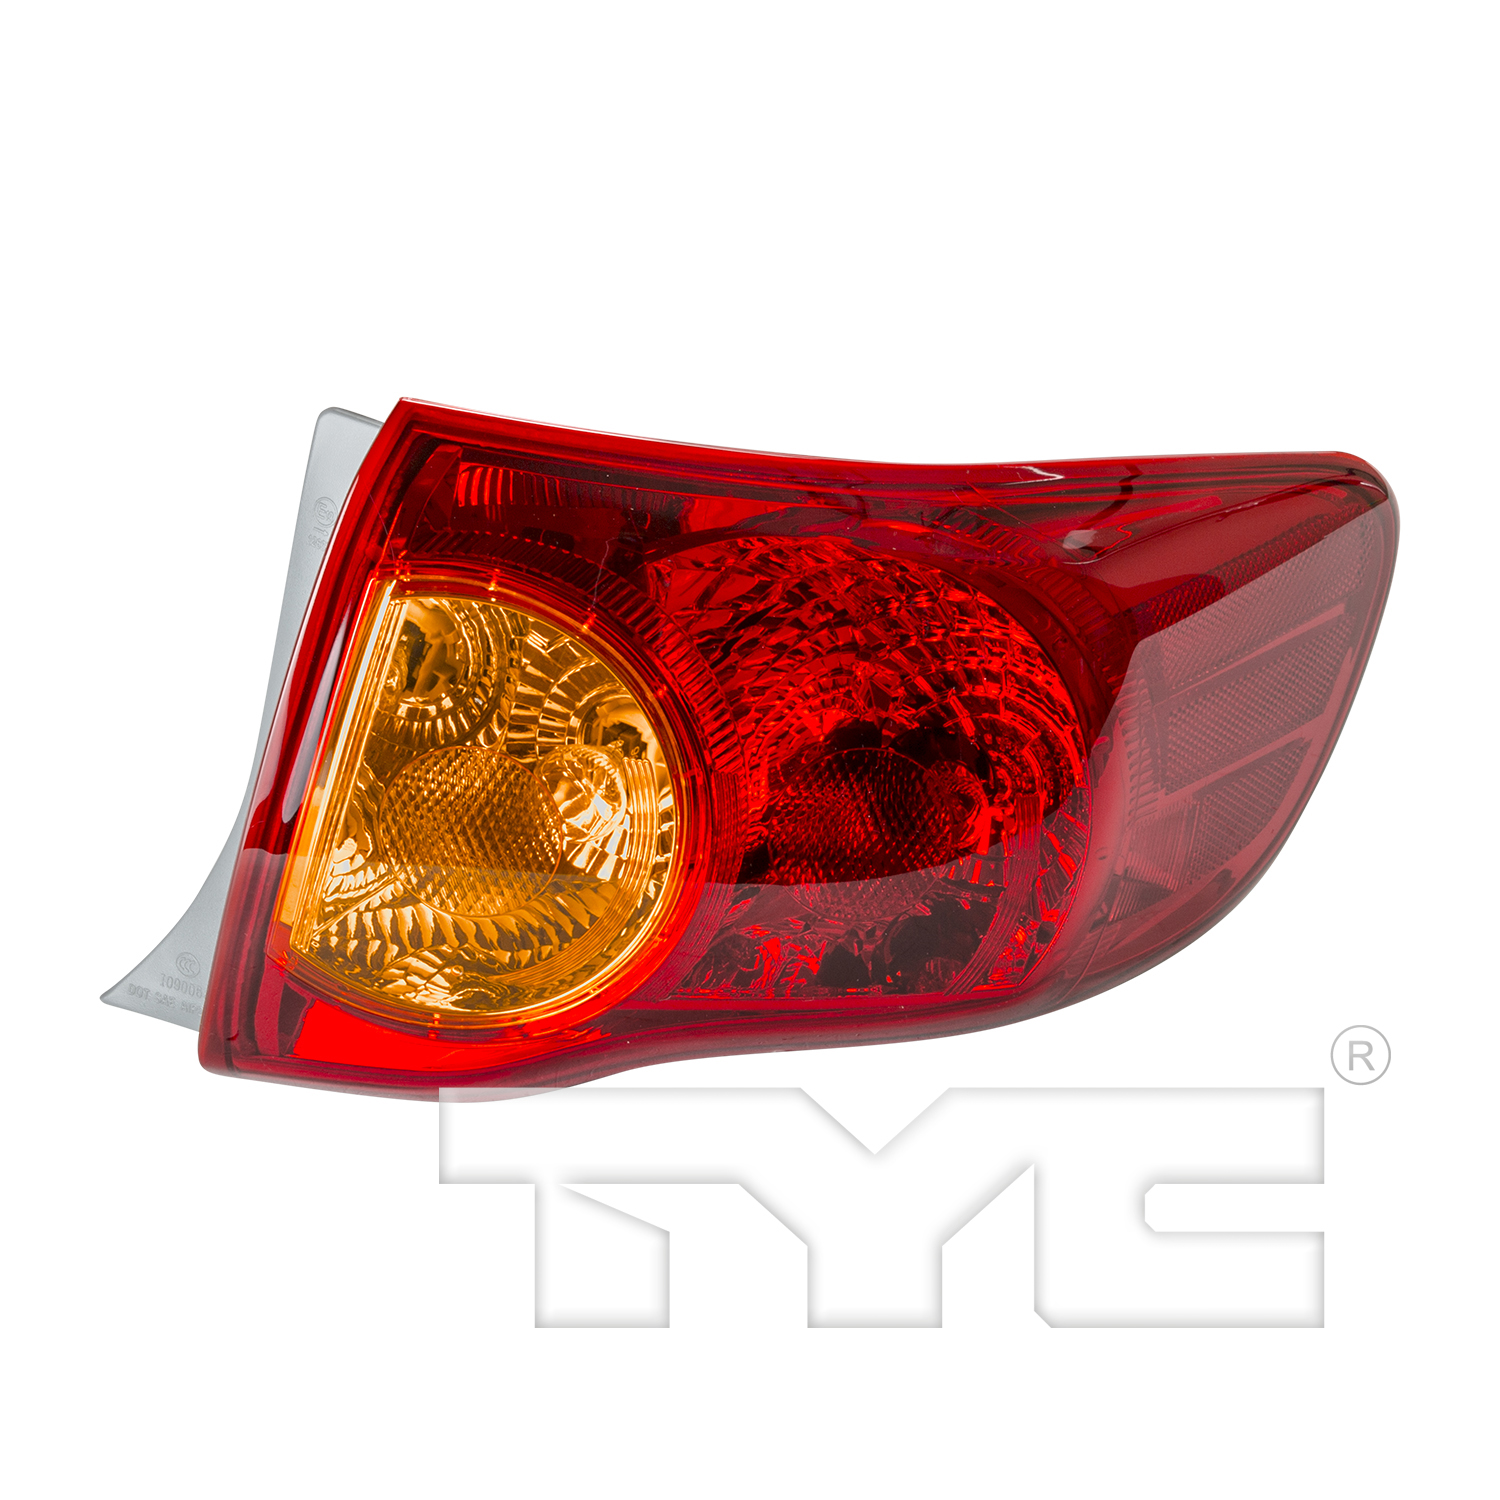 Aftermarket TAILLIGHTS for TOYOTA - COROLLA, COROLLA,09-10,RT Taillamp assy